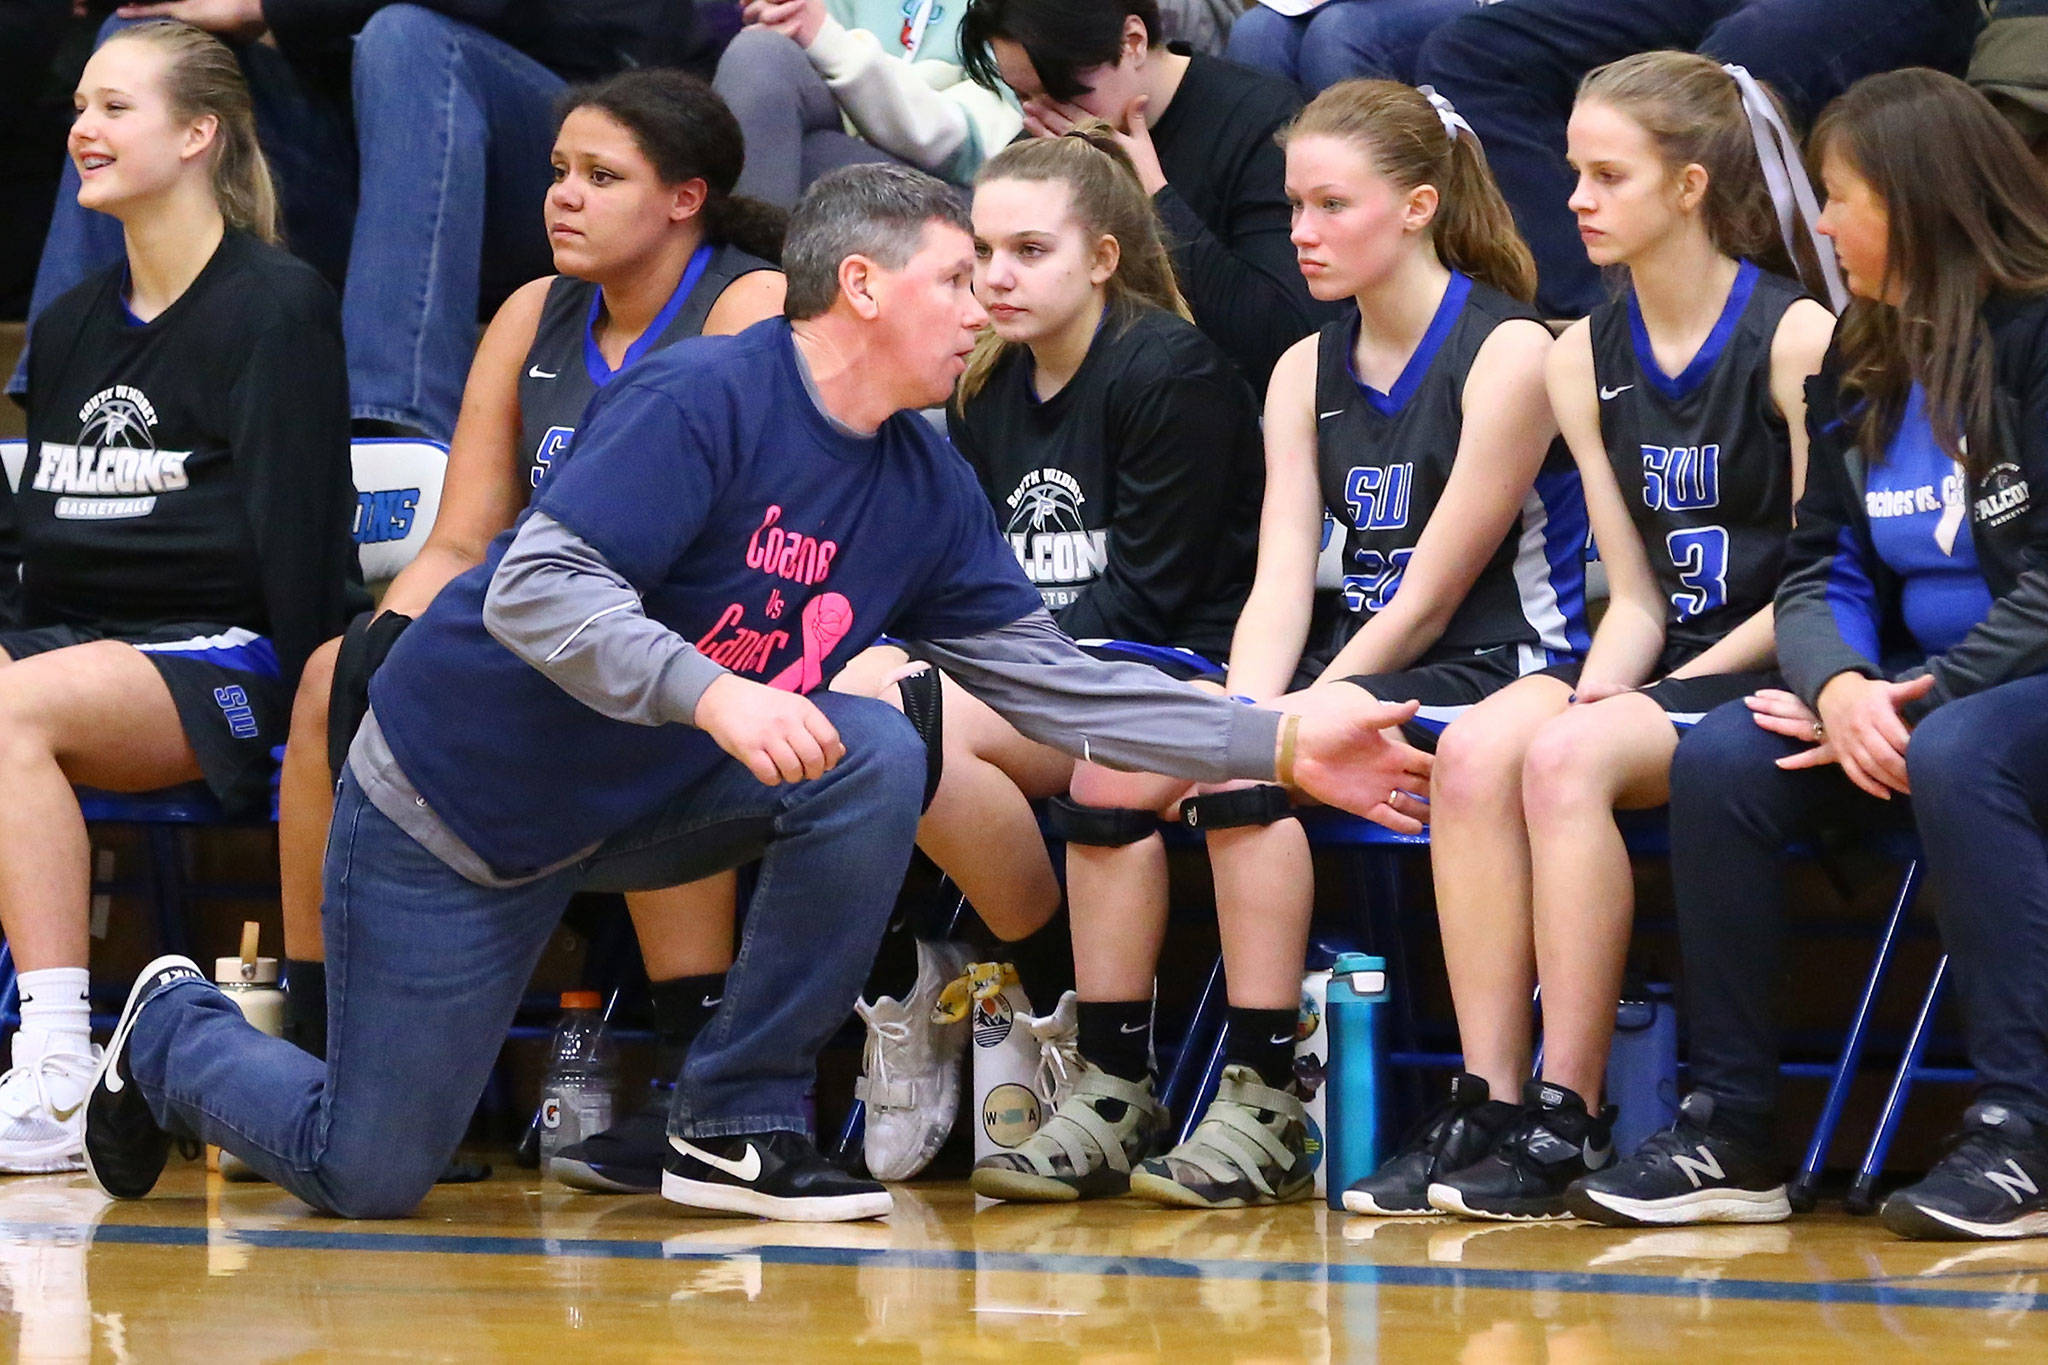 South Whidbey coach Jeff Hanson discusses the Coupeville game with Mary Moss (3).(Photo by John Fisken)